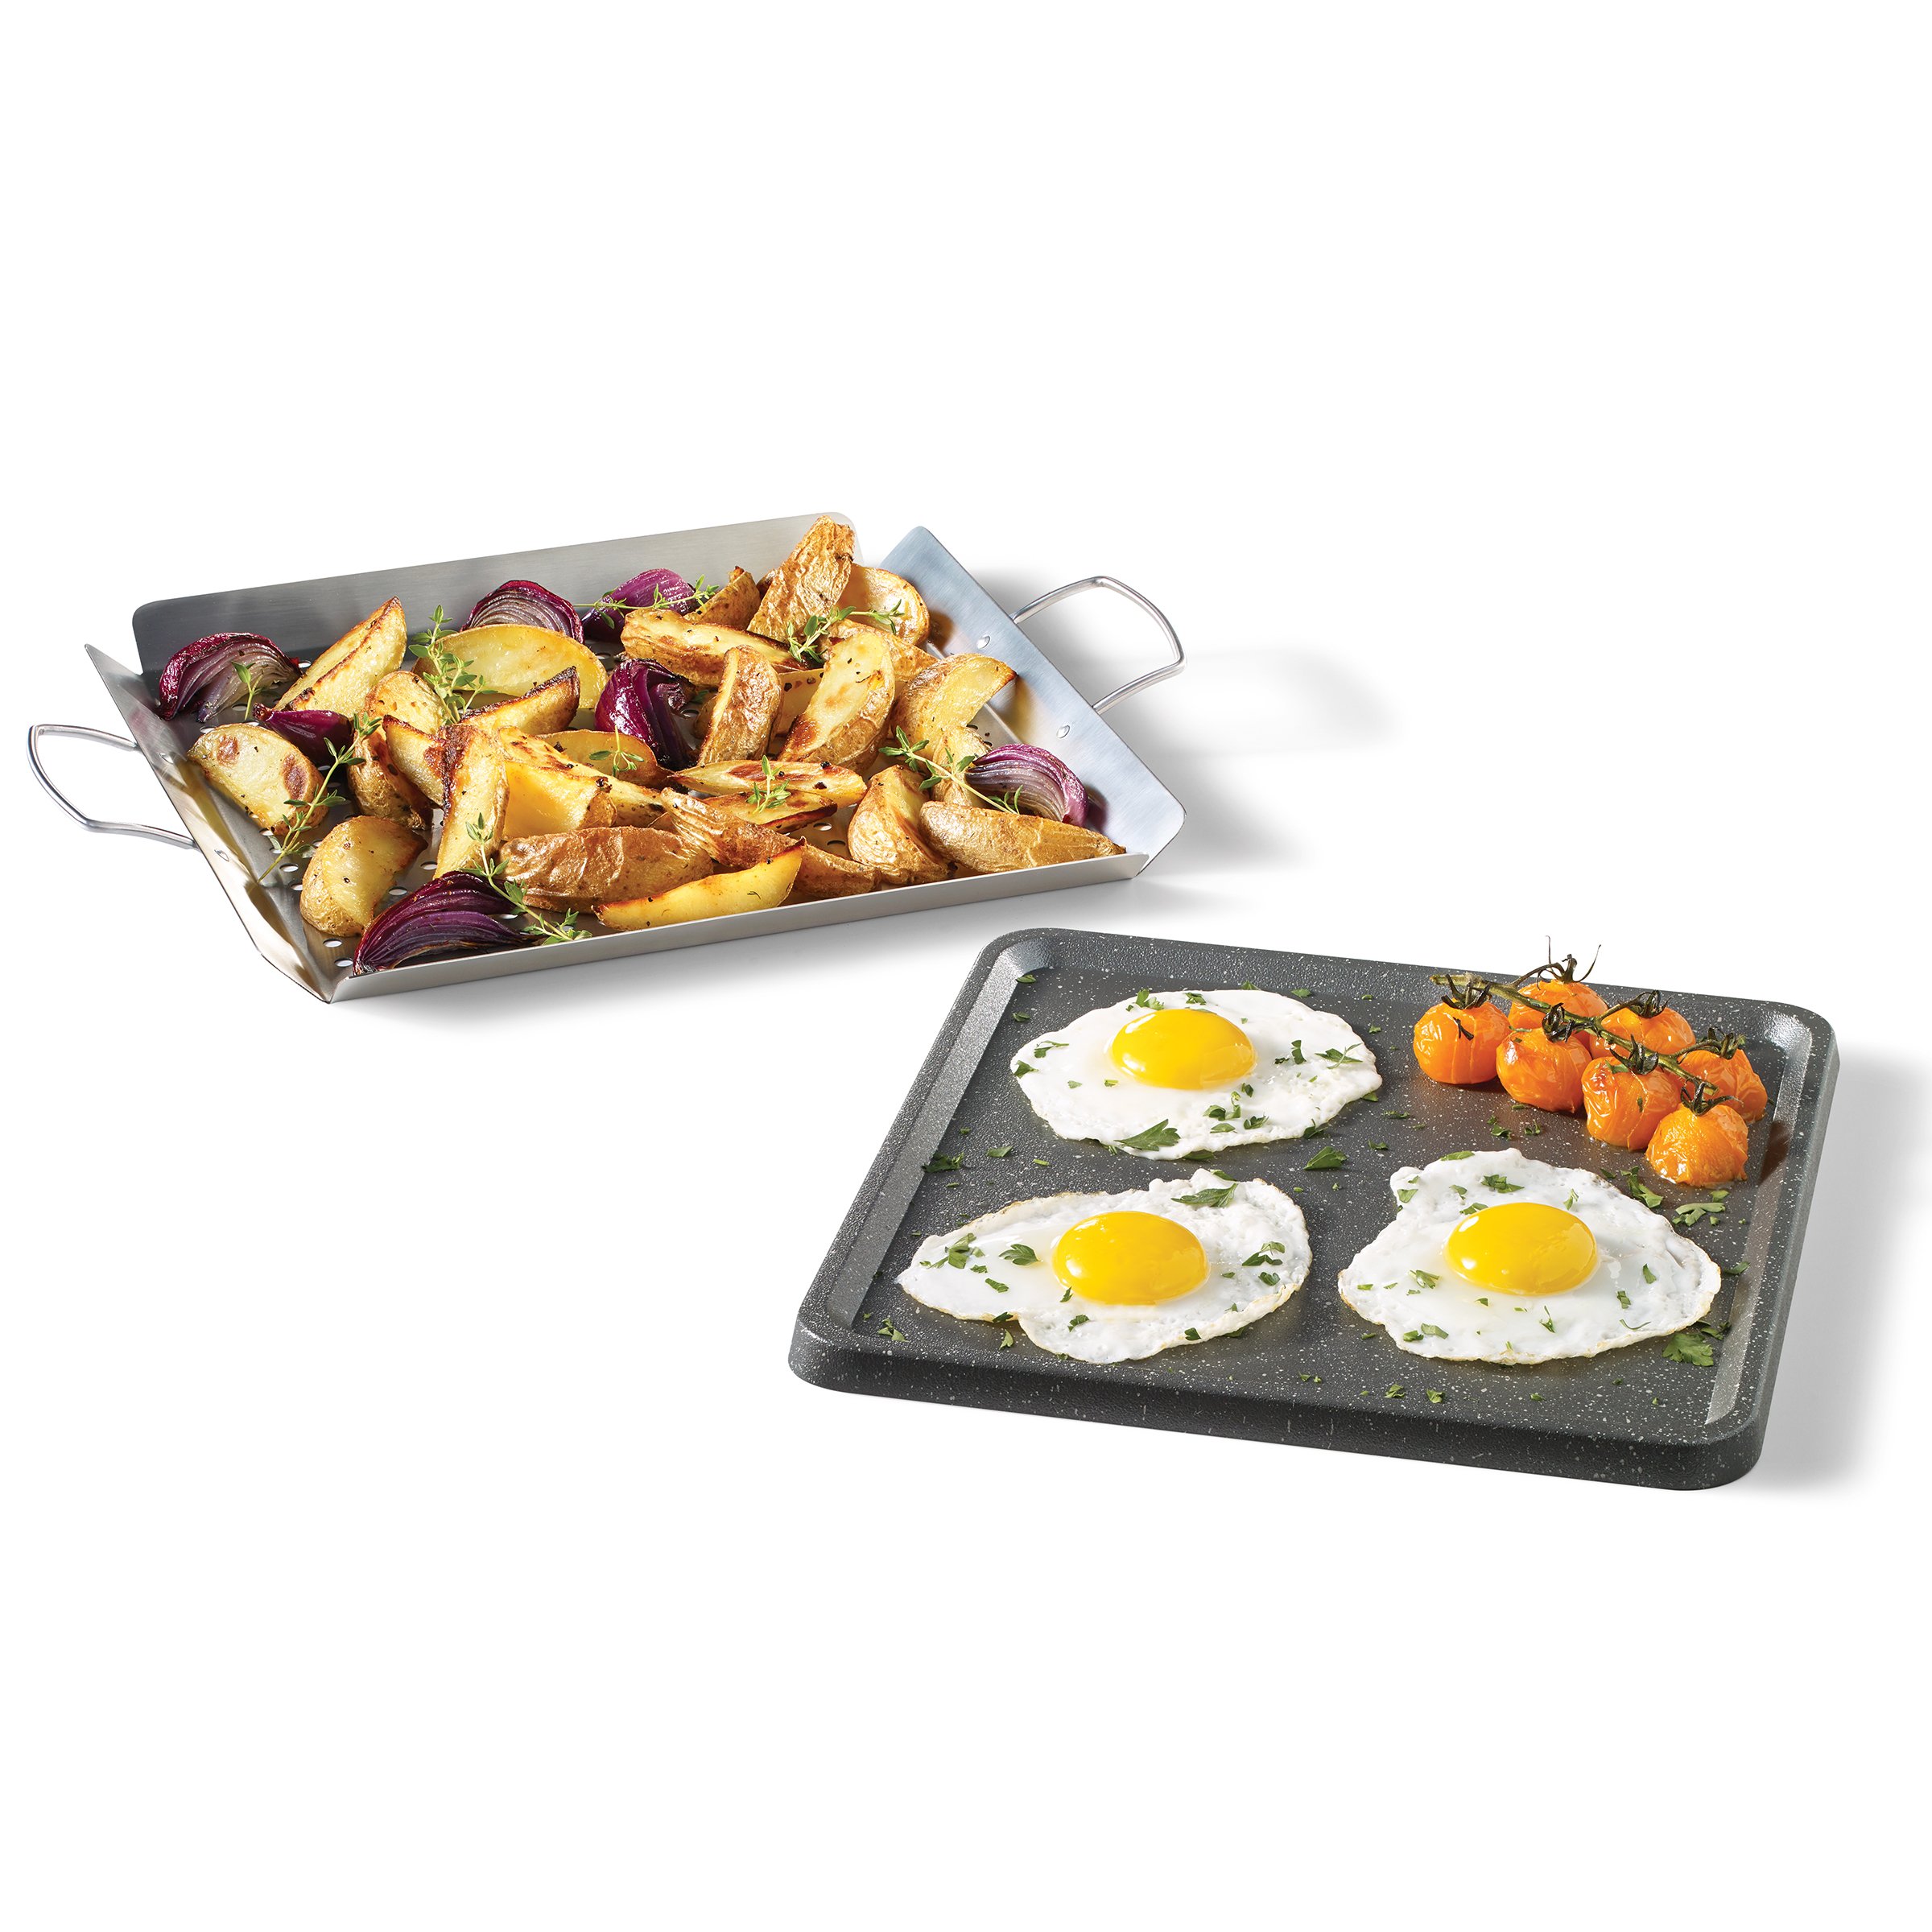 The 34614 Rock Reversible Grill Griddle 